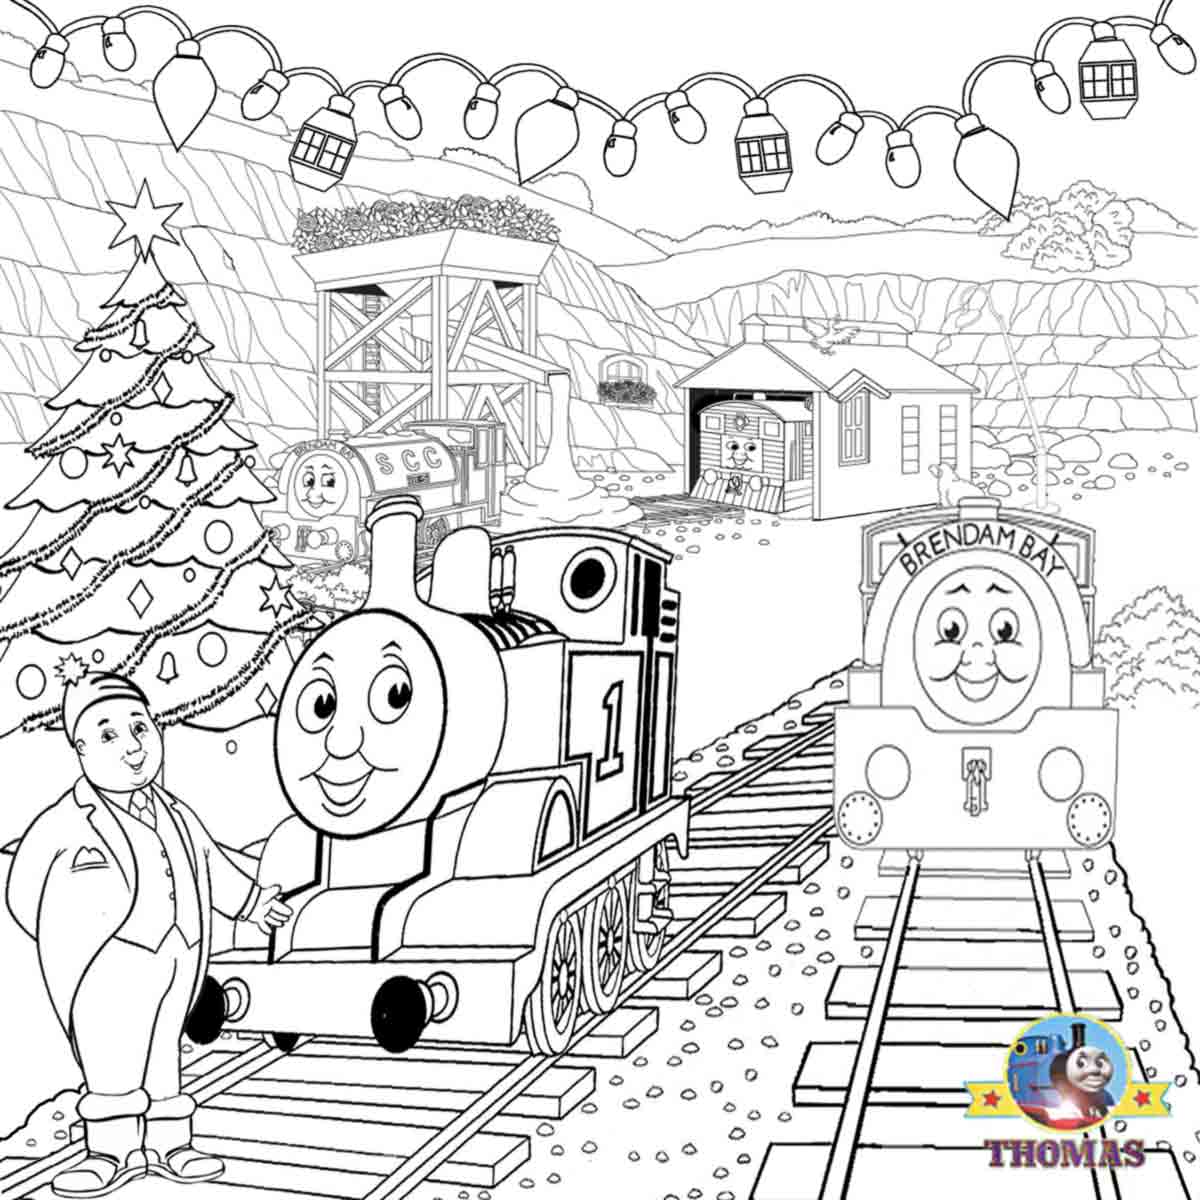 Fun activities printable Thomas train and friends Christmas party happy Xmas coloring pages to color